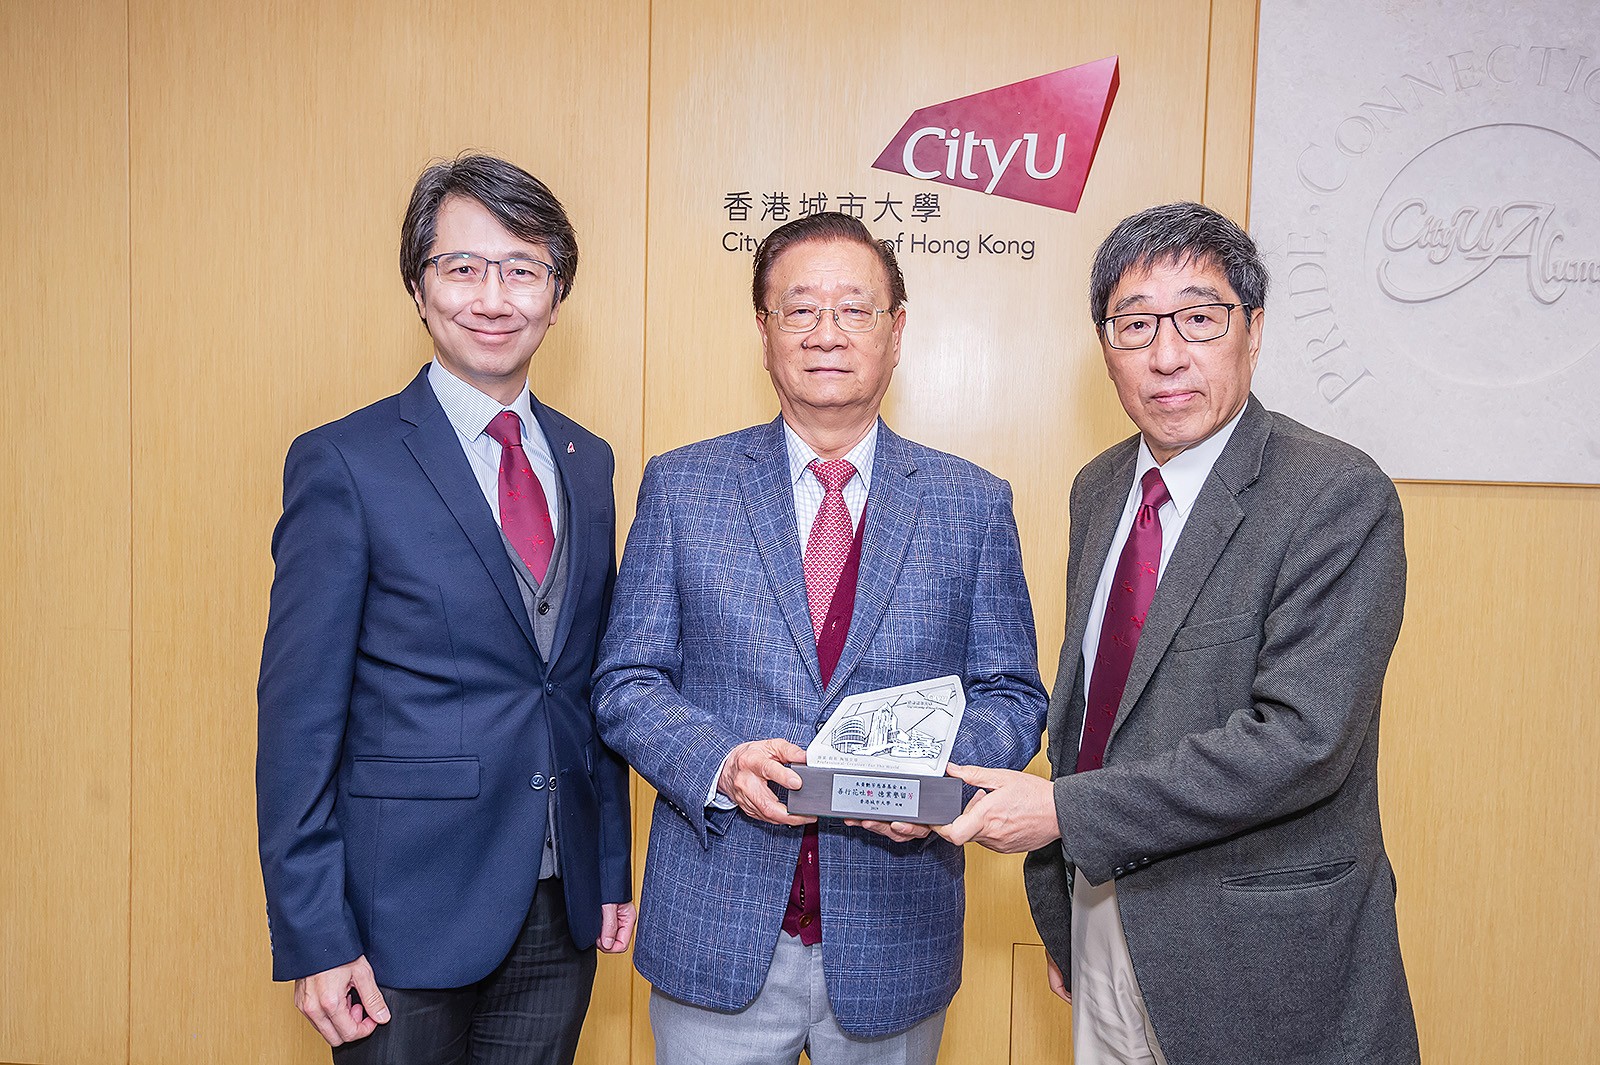 HK$2 million from Chu Wong Yim Fong Charitable Foundation to set up an endowment fund